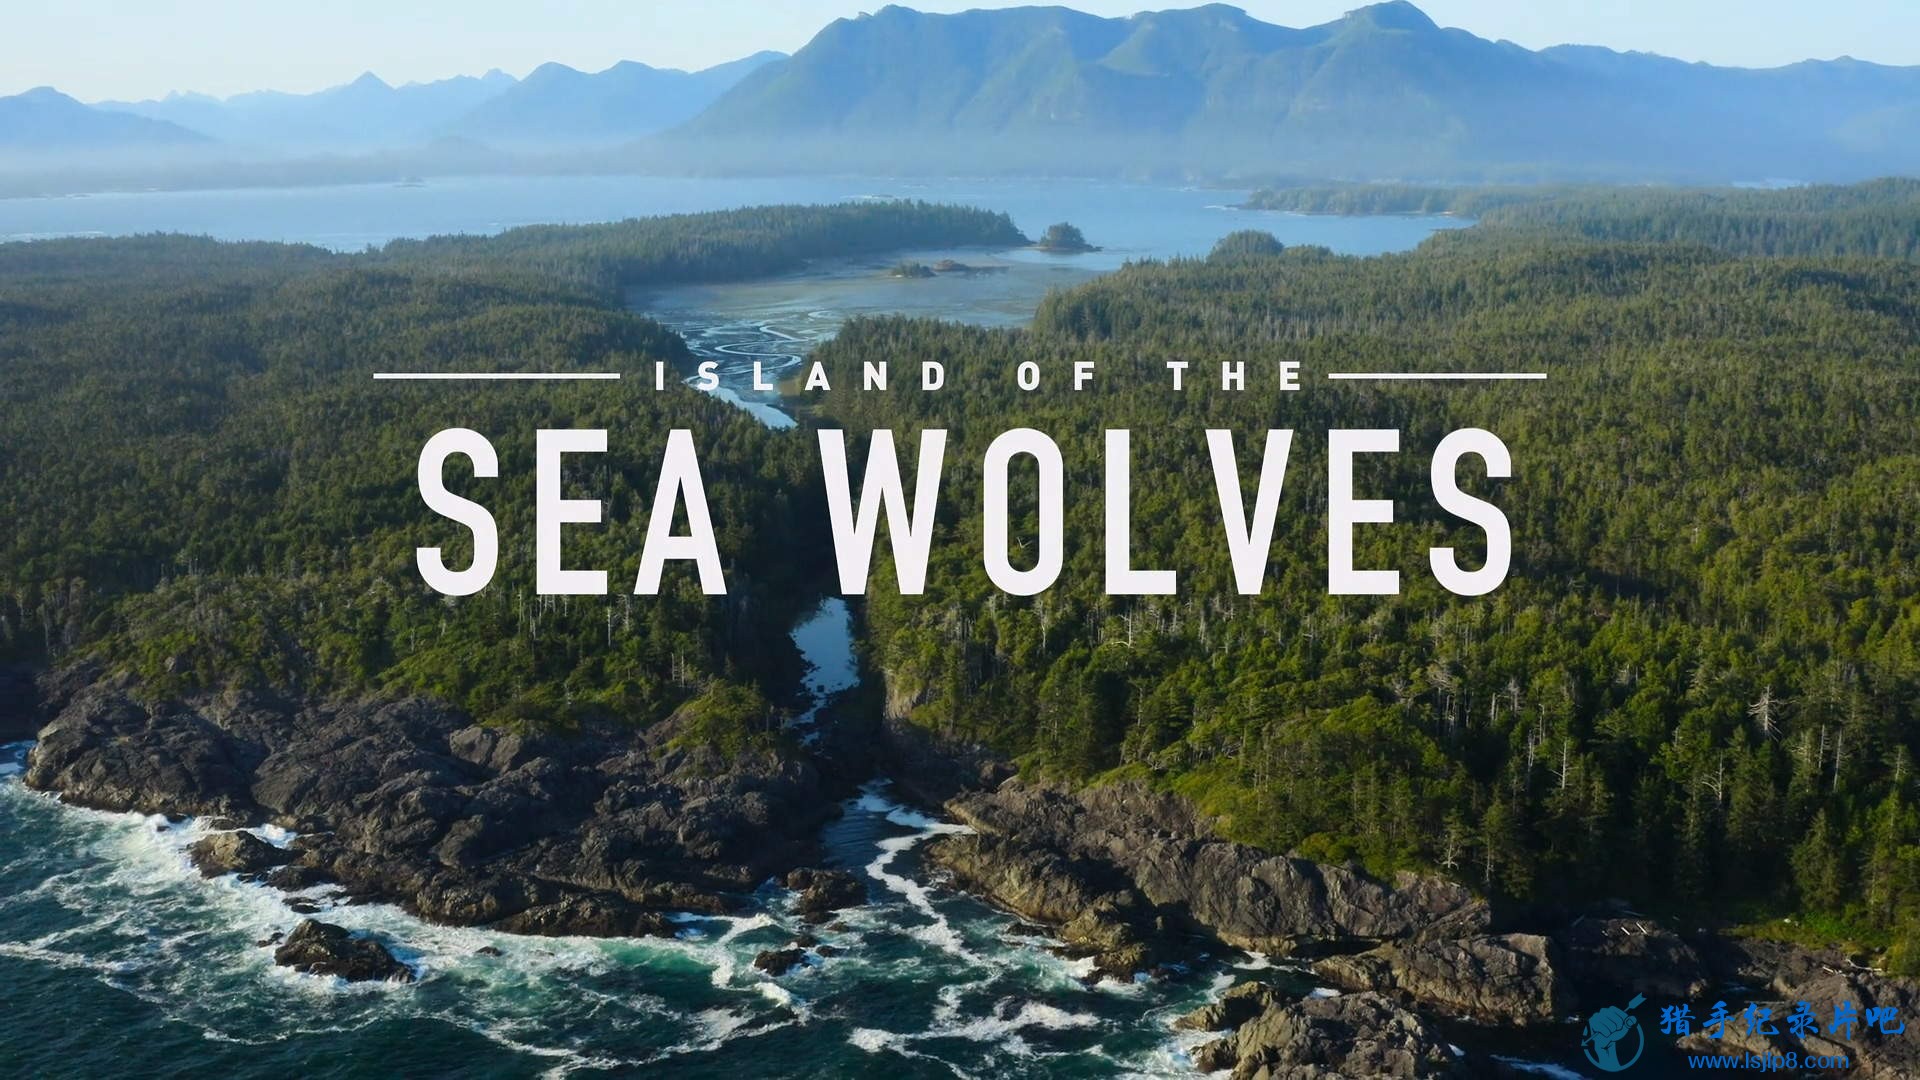 Island.of.the.Sea.Wolves.S01E01.Spring.1080p.NF.WEB-DL.DDP5.1.Atmos.H.264-SMURF.jpg